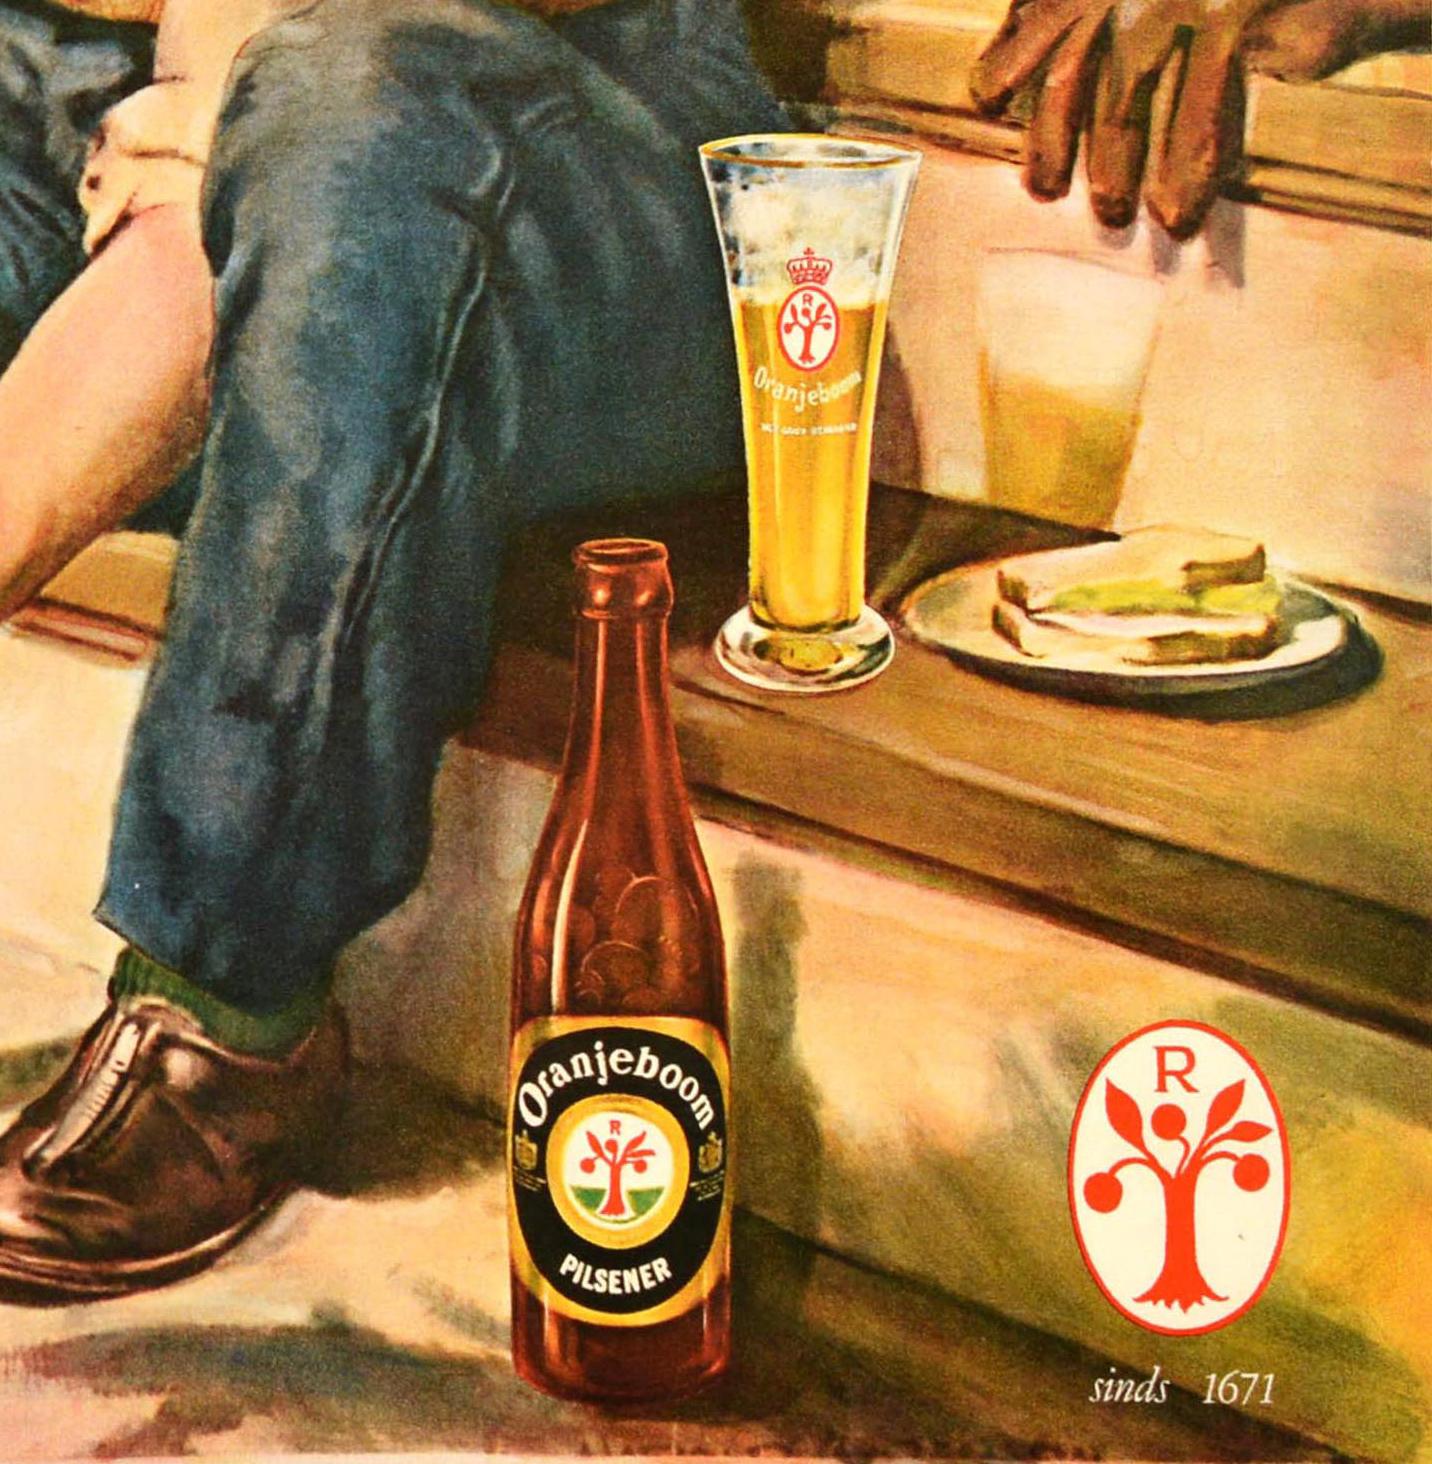 Original vintage pilsener beer drink advertising poster for Oranjeboom Bier featuring a great illustration of a worker sitting on a veranda step taking a break from gardening and enjoying a glass of beer and a sandwich while teaching a puppy tricks